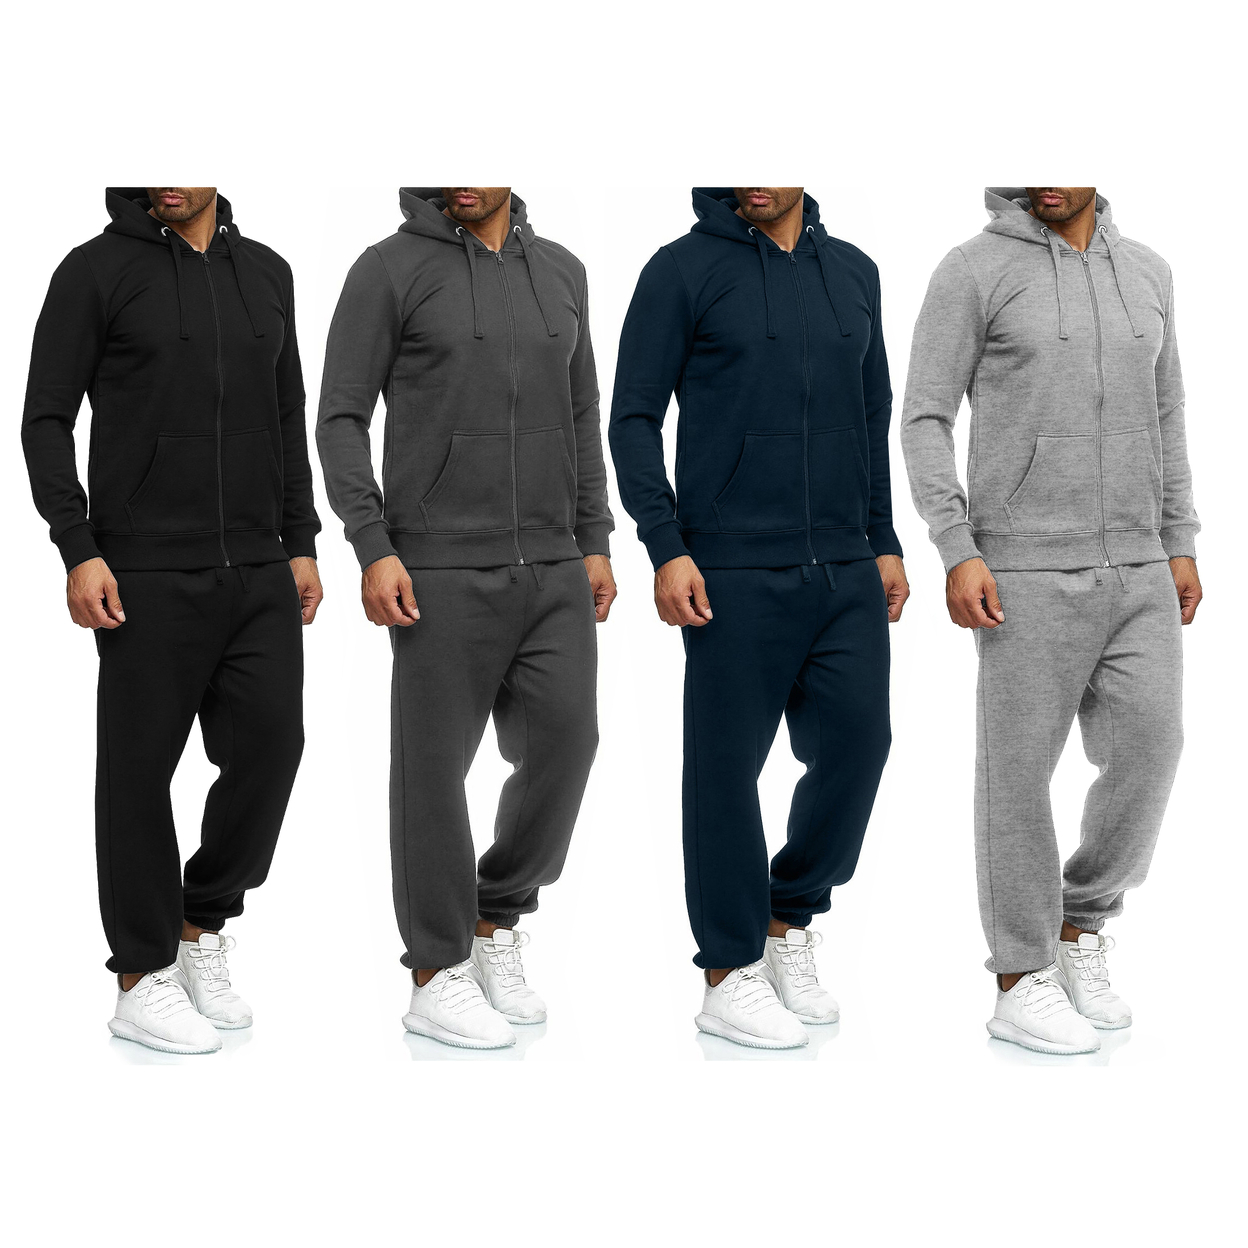 2-Pack: Men's Casual Big & Tall Athletic Active Winter Warm Fleece Lined Full Zip Tracksuit Jogger Set - Navy, 3xl